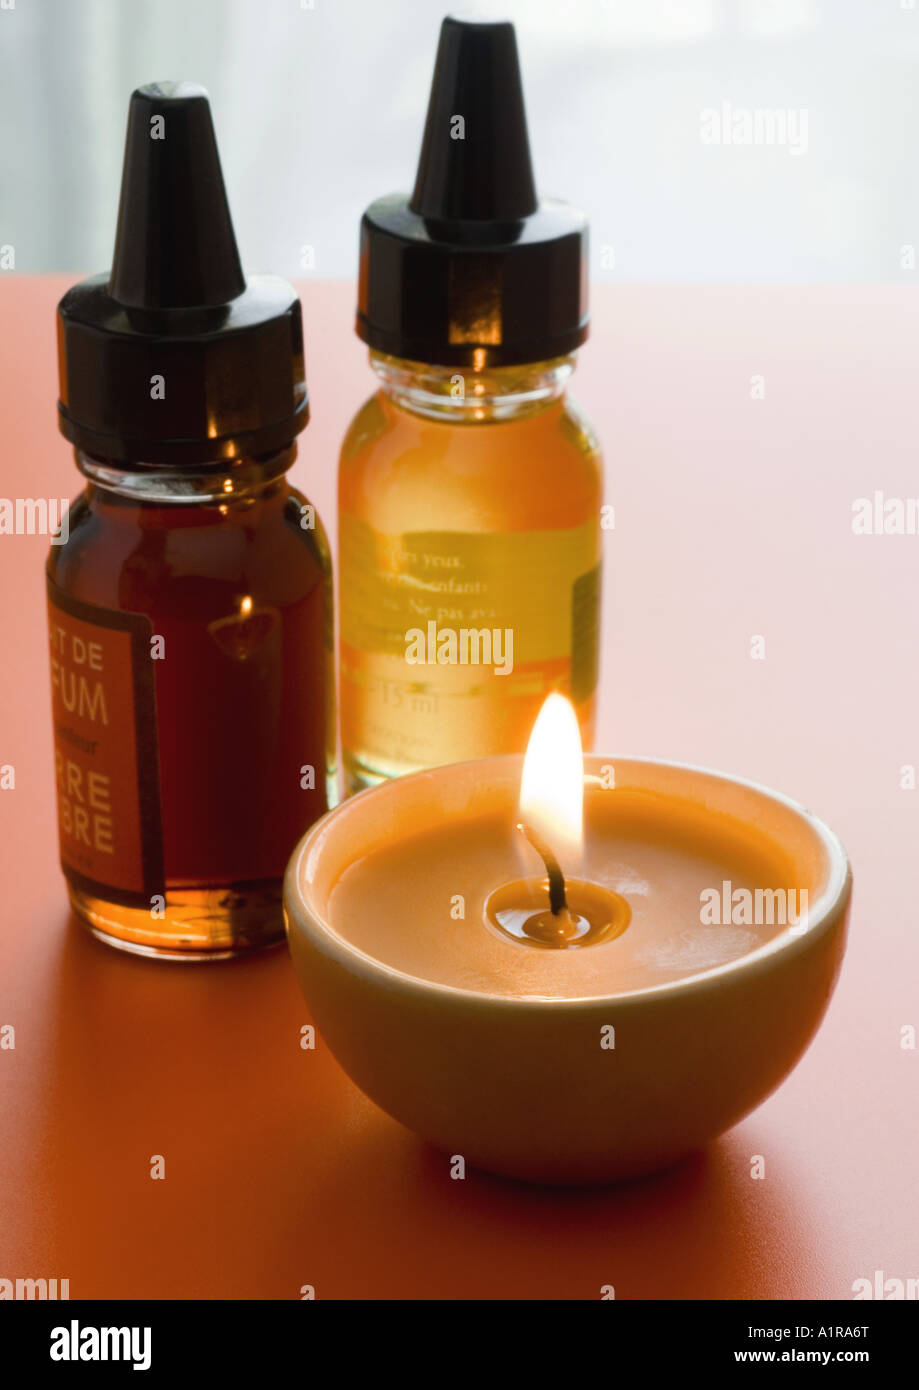 Bottles of scented oils and candle Stock Photo